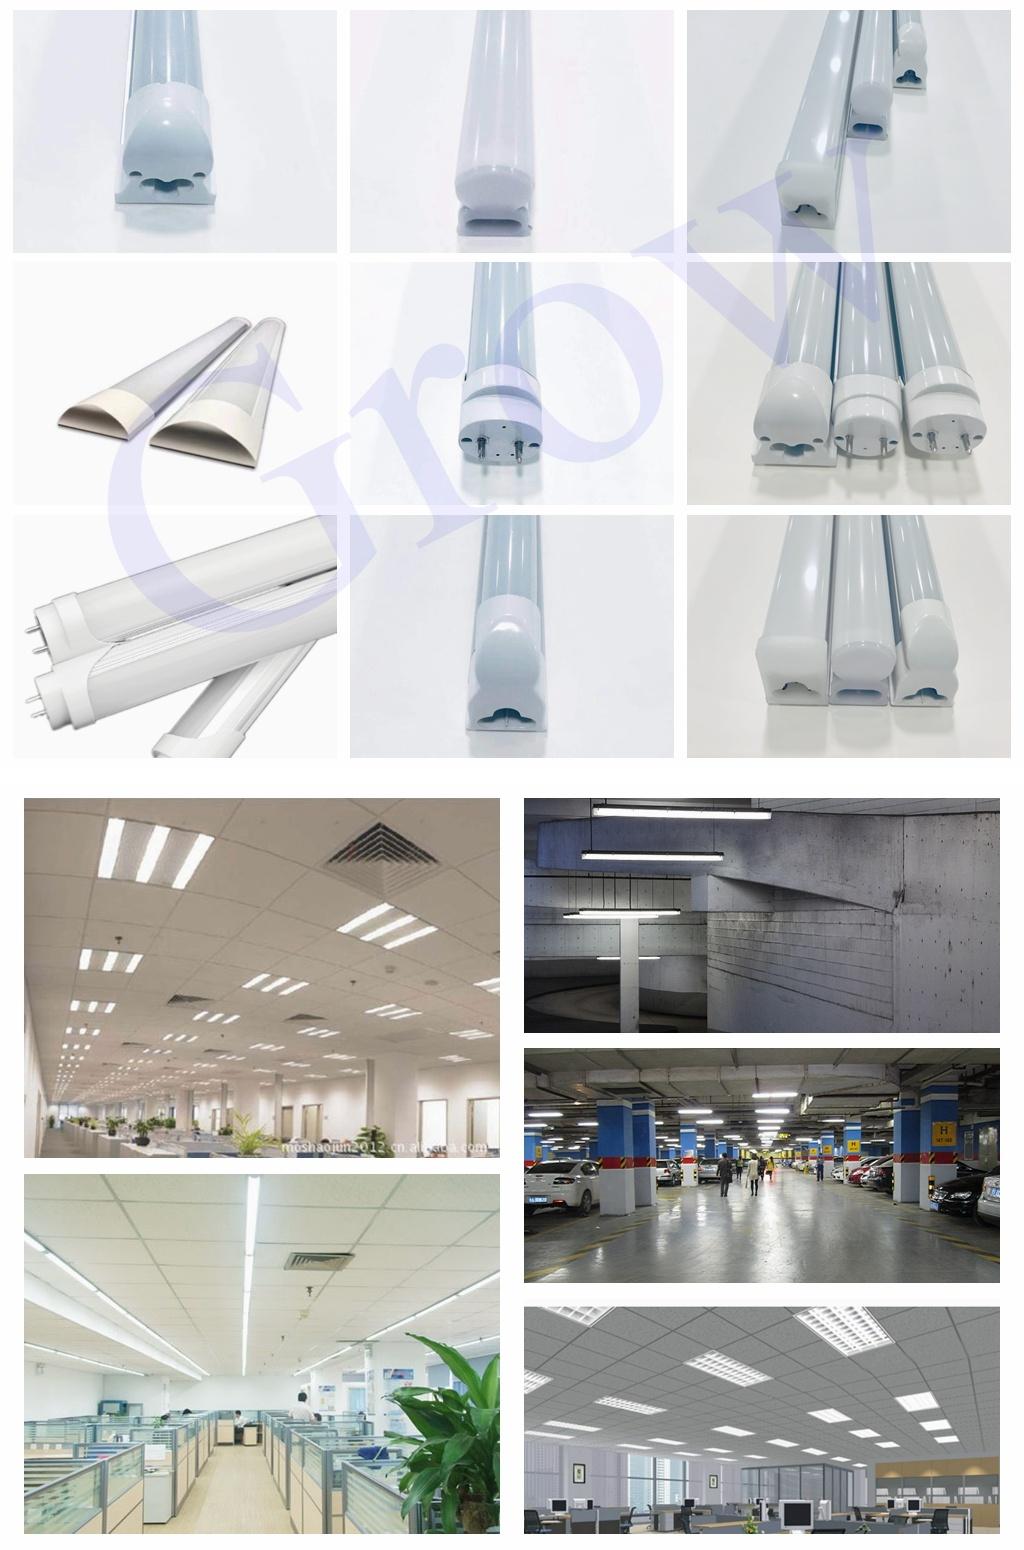 Chinese Manufacturer of LED Tube SMD2835 20W All plastic Material Tube Light with CE RoHS Approved